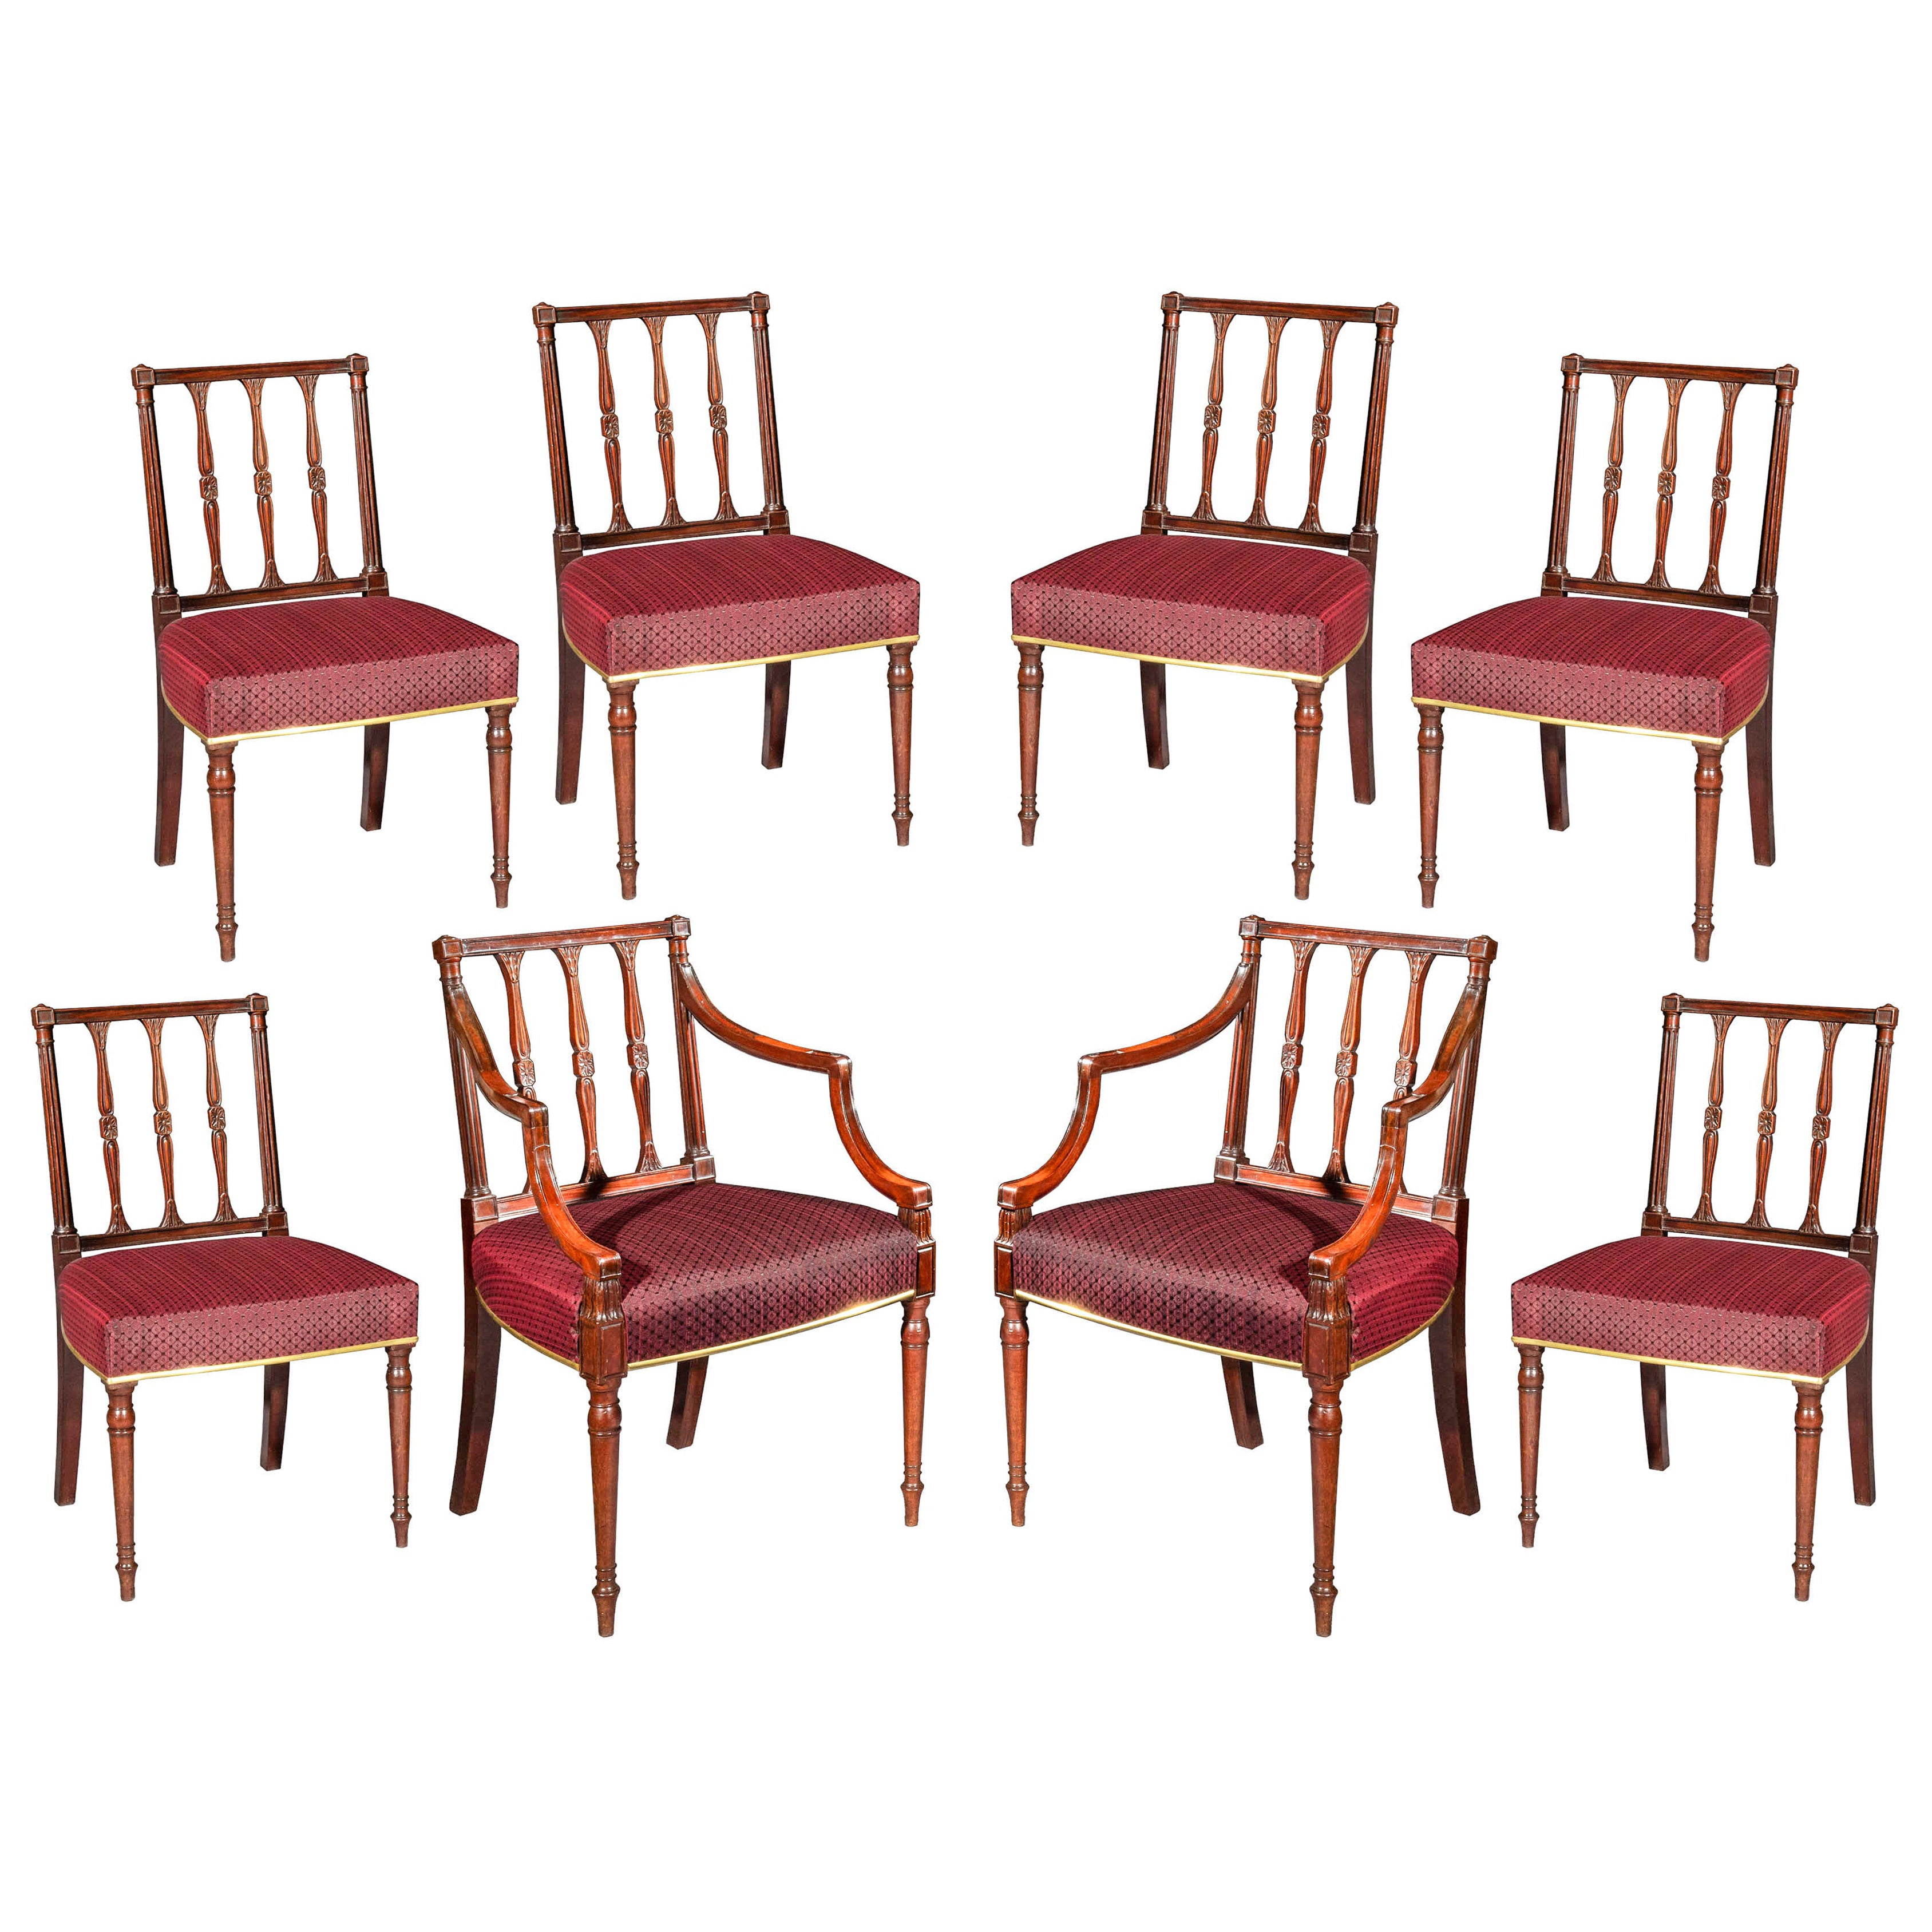 Set of Eight 18th Century Dining Chairs